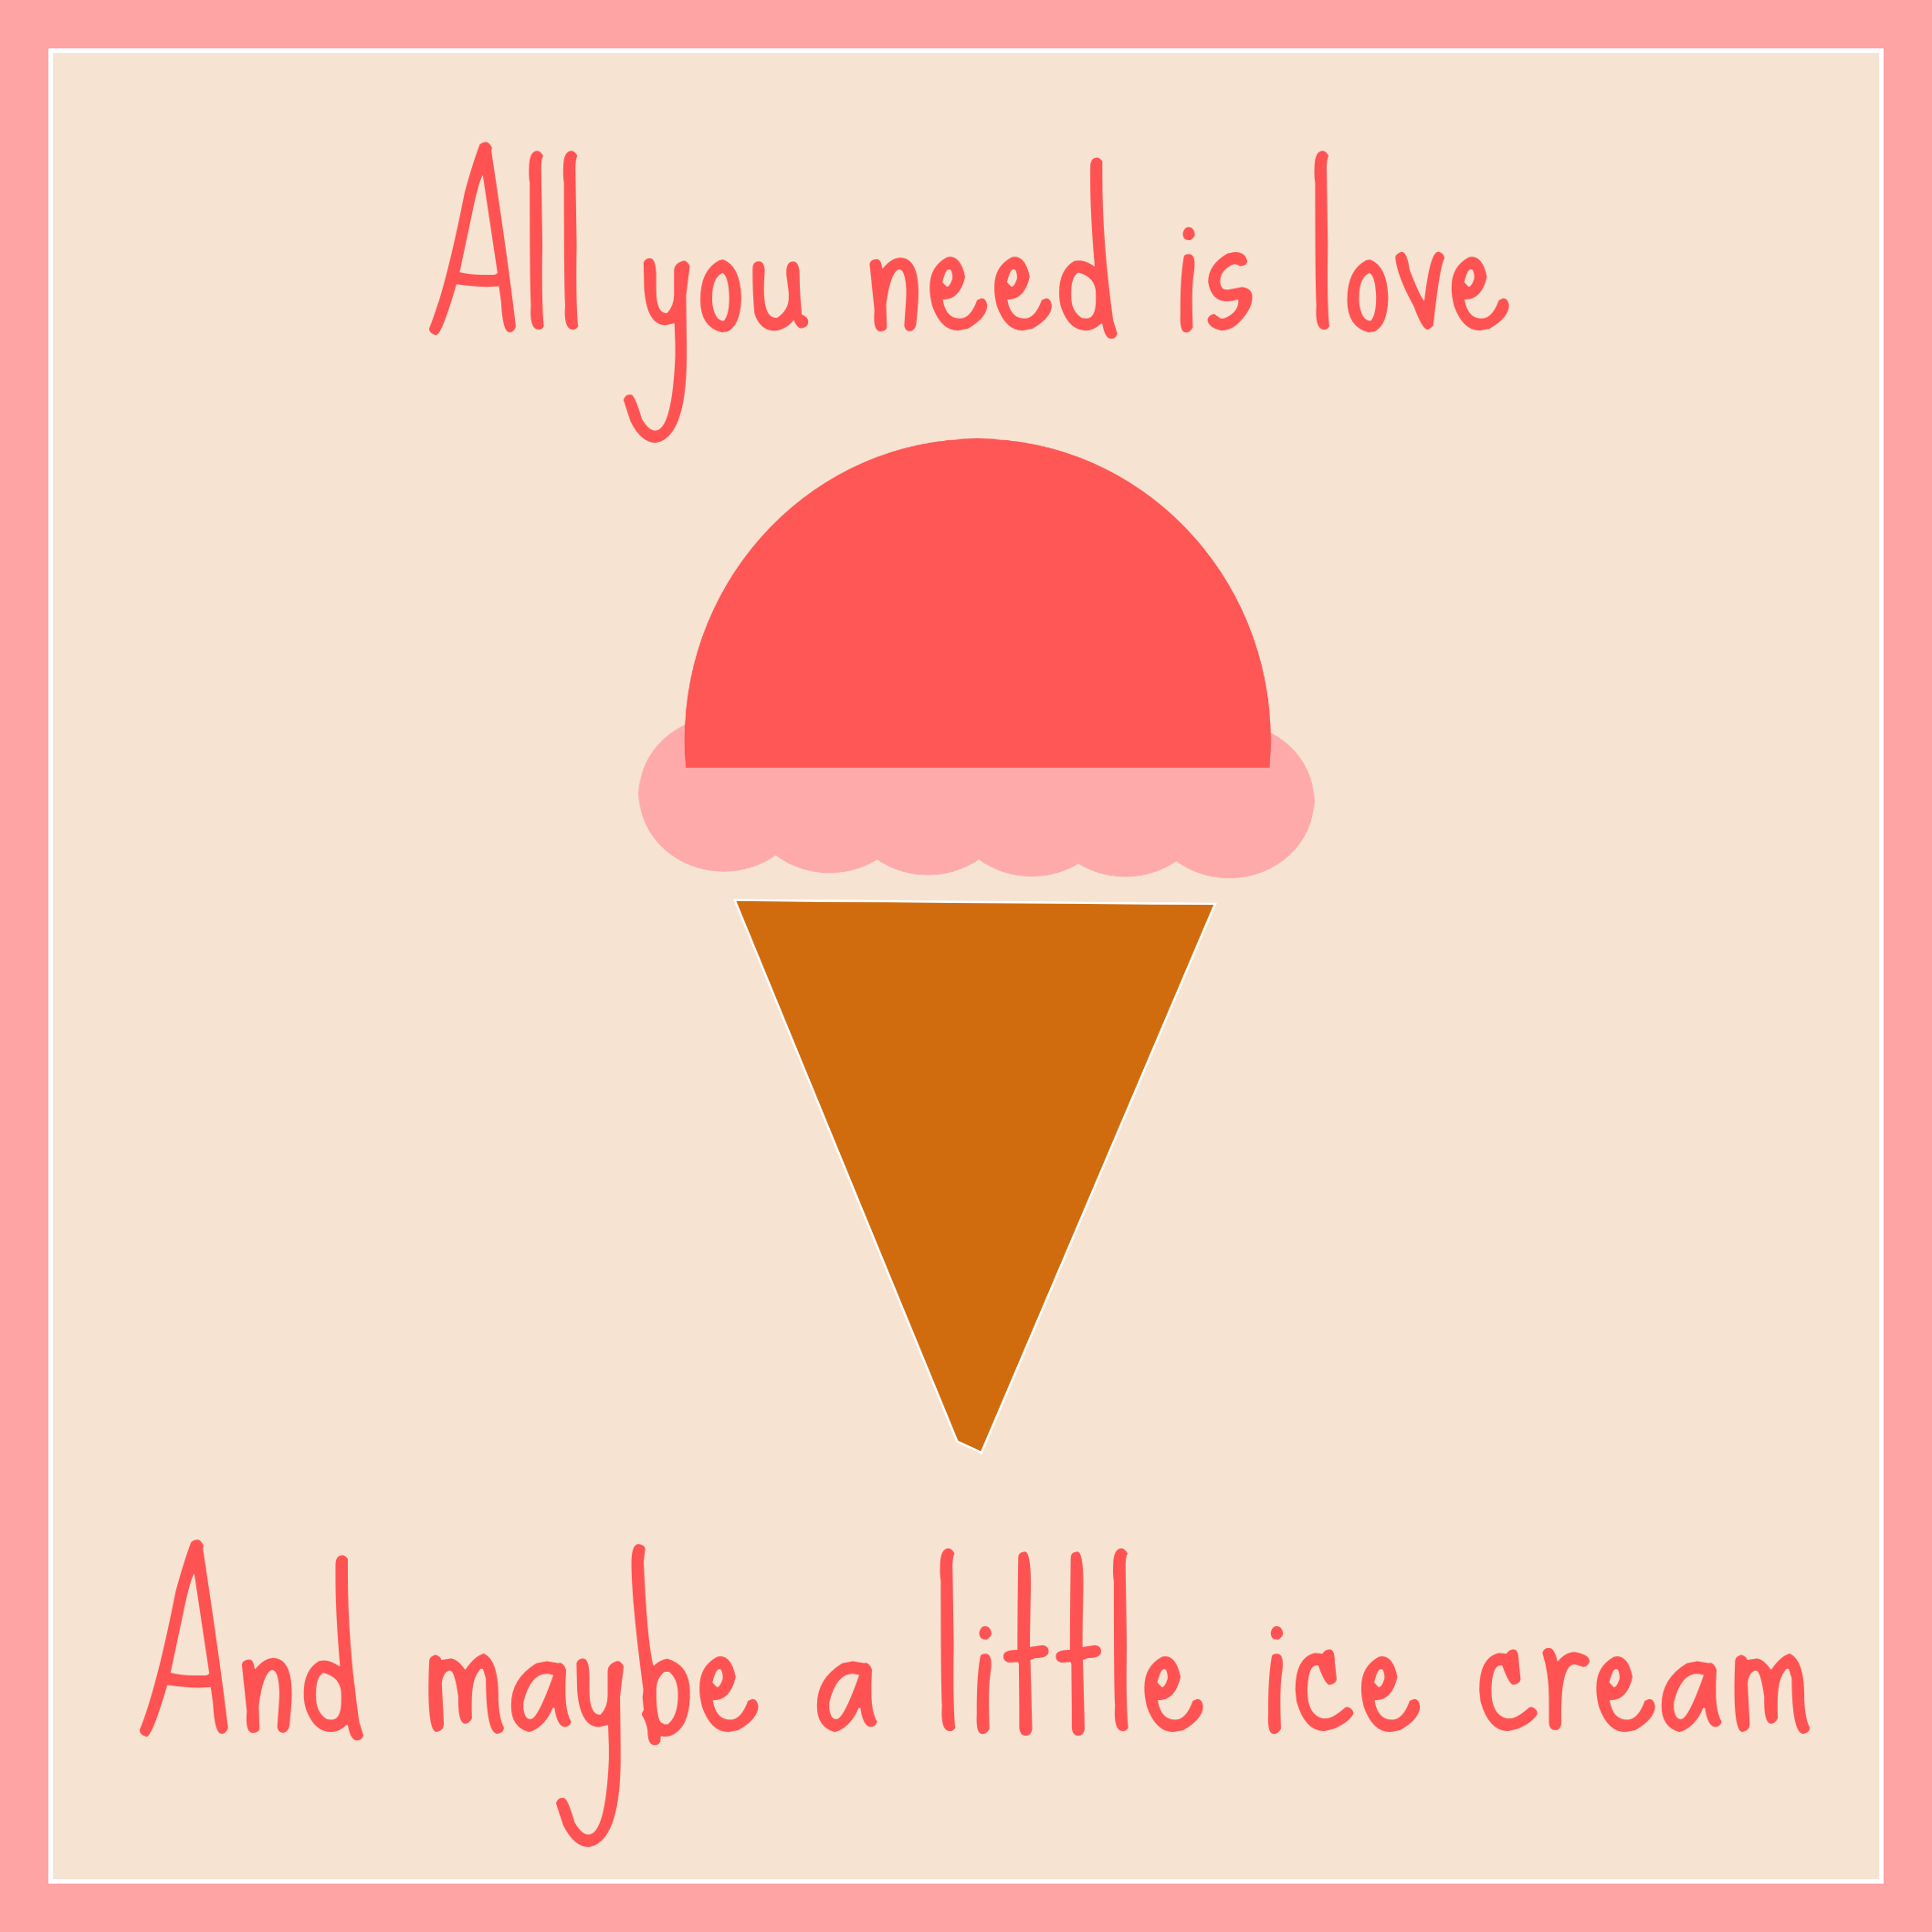 Feel Good Friday: All You Need Is Love and Ice Cream